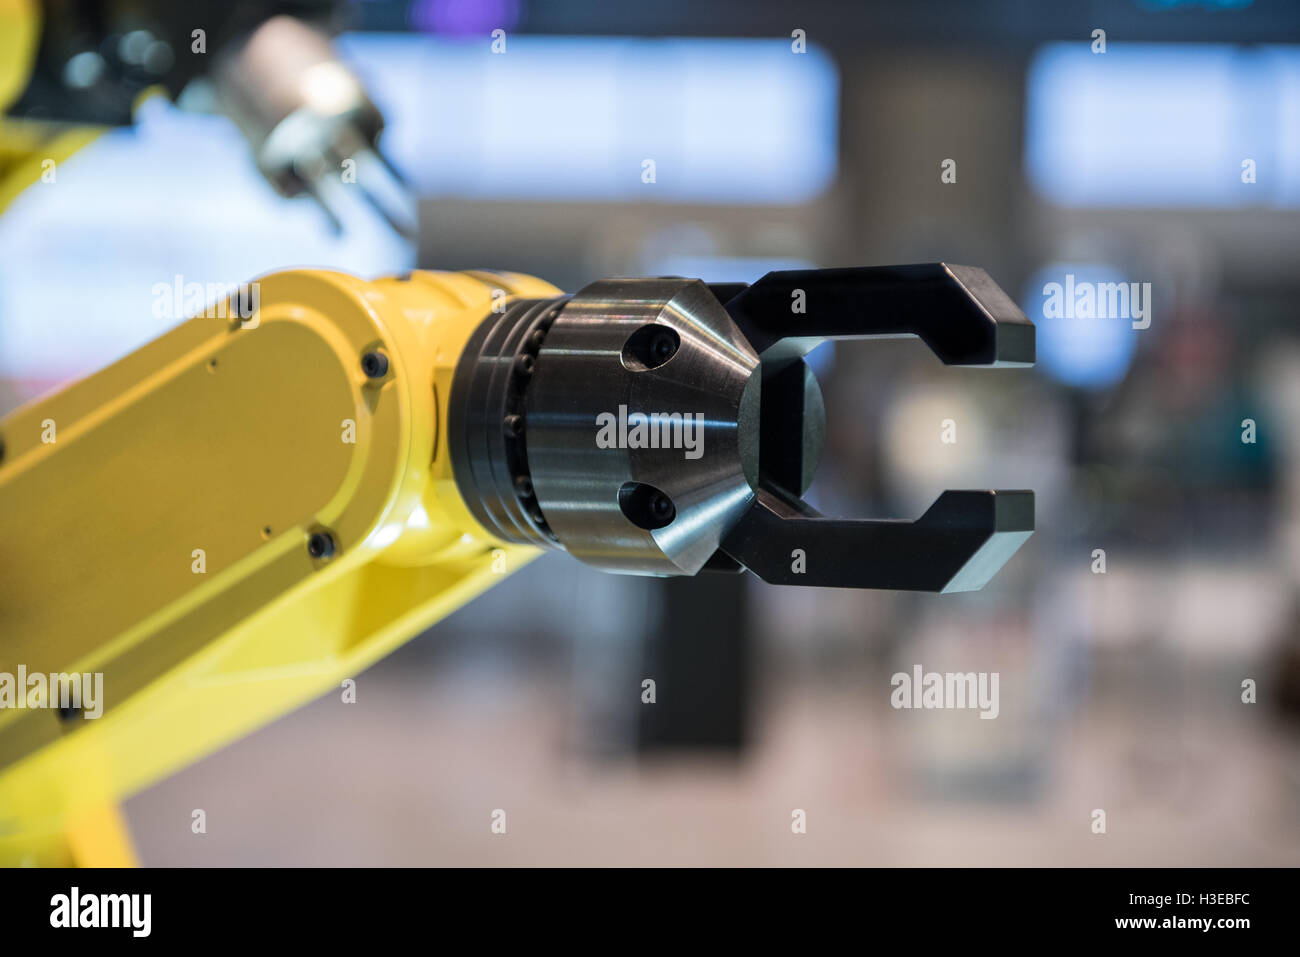 A yellow robotic arm isolated on a blurry background Stock Photo